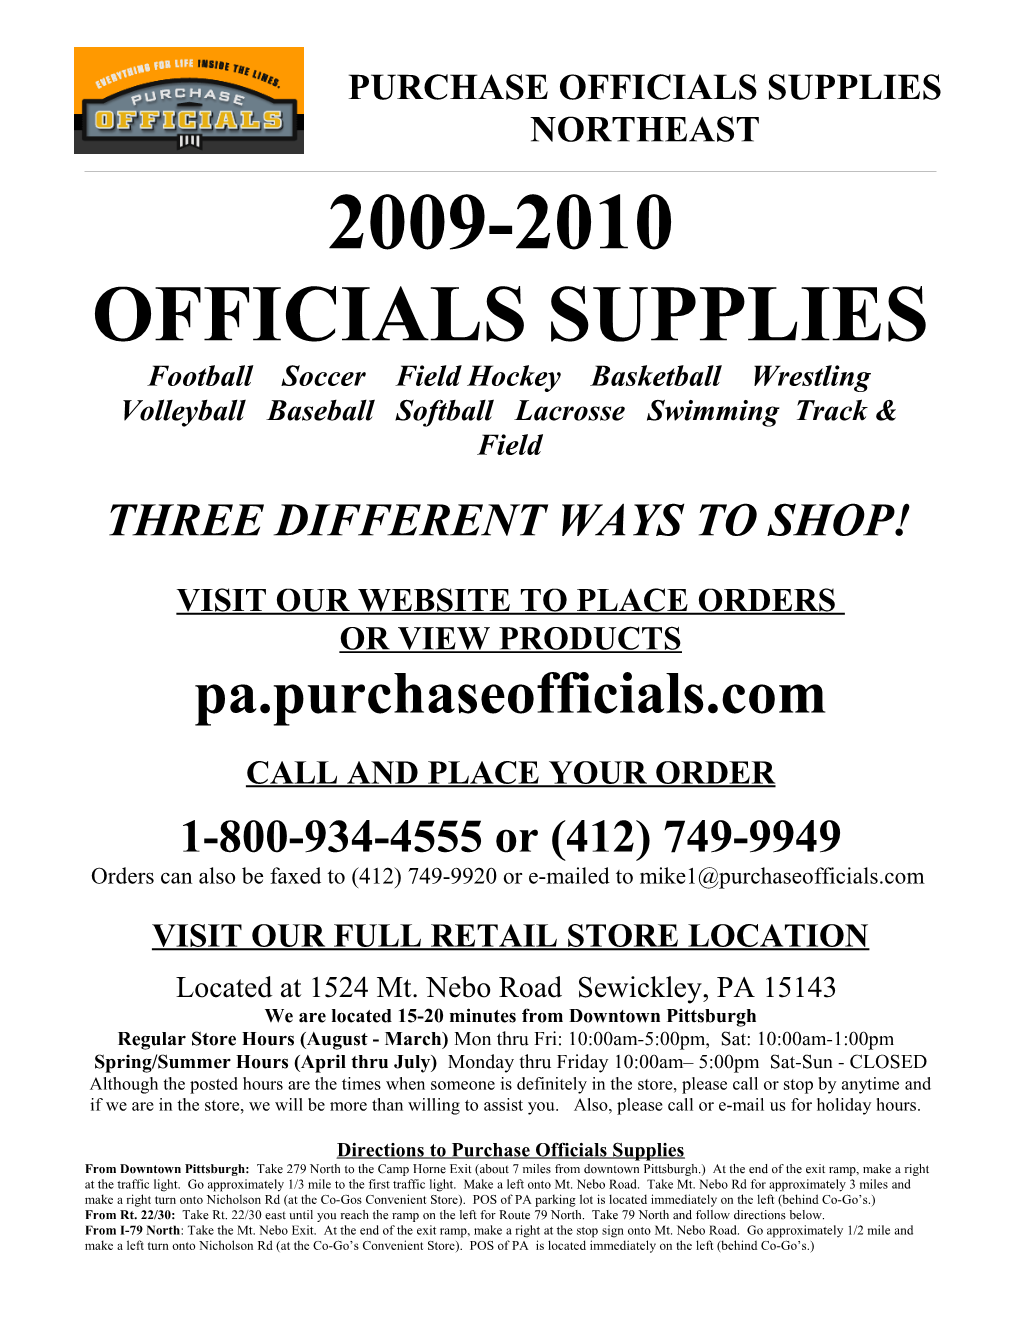 Purchase Officials Supplies of PA